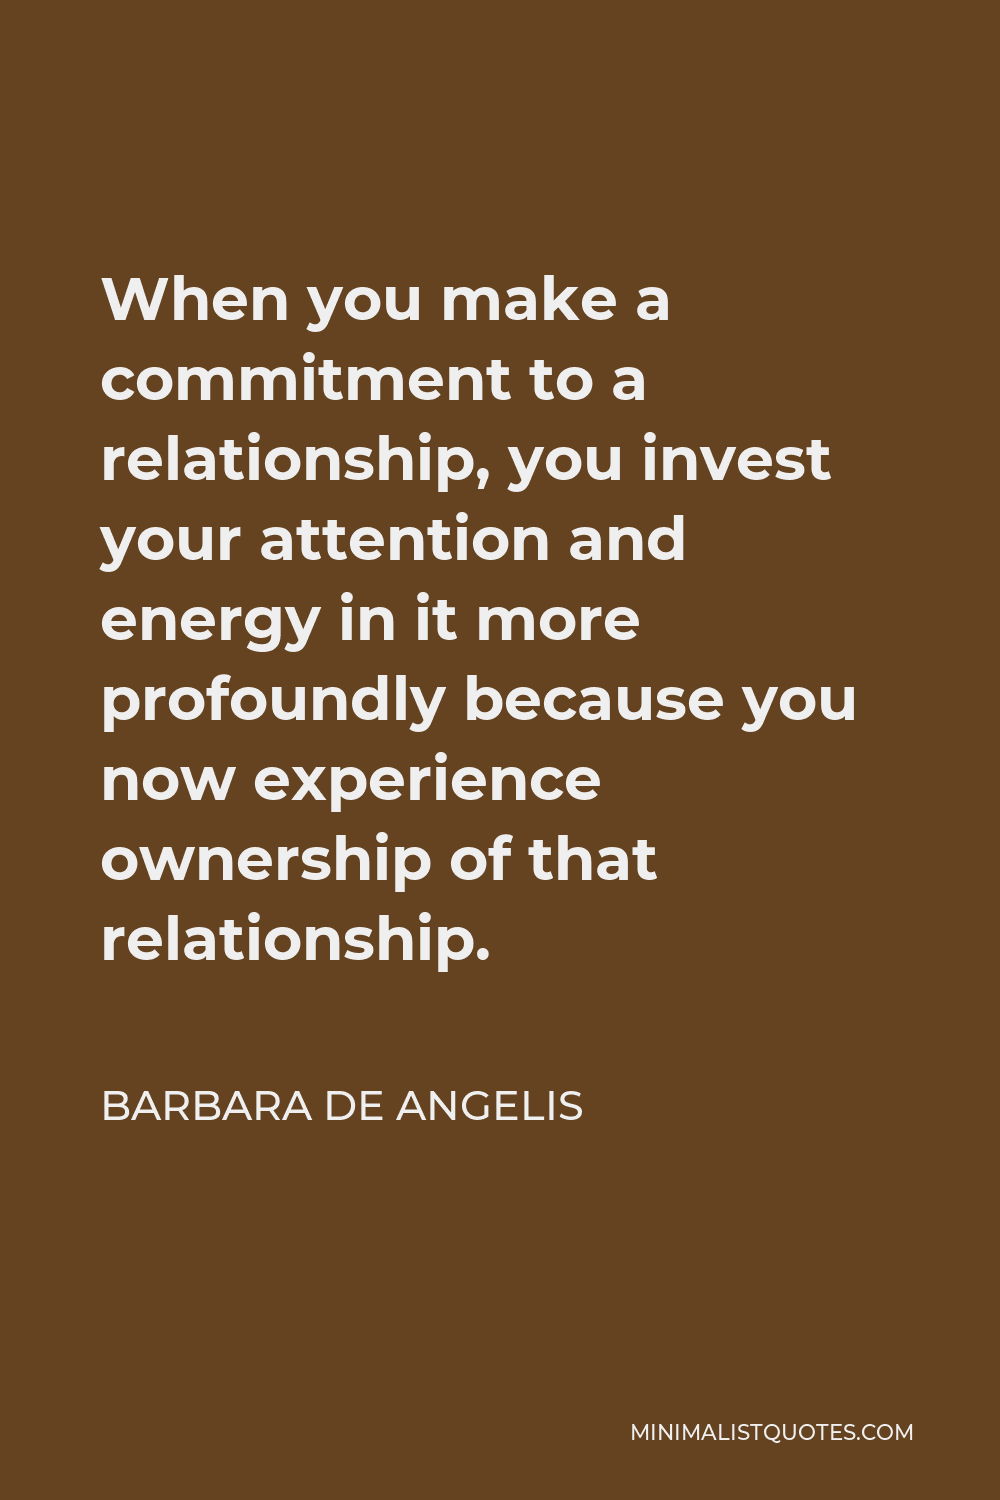 Barbara De Angelis Quote - When you make a commitment to a relationship, you invest your attention and energy in it more profoundly because you now experience ownership of that relationship.